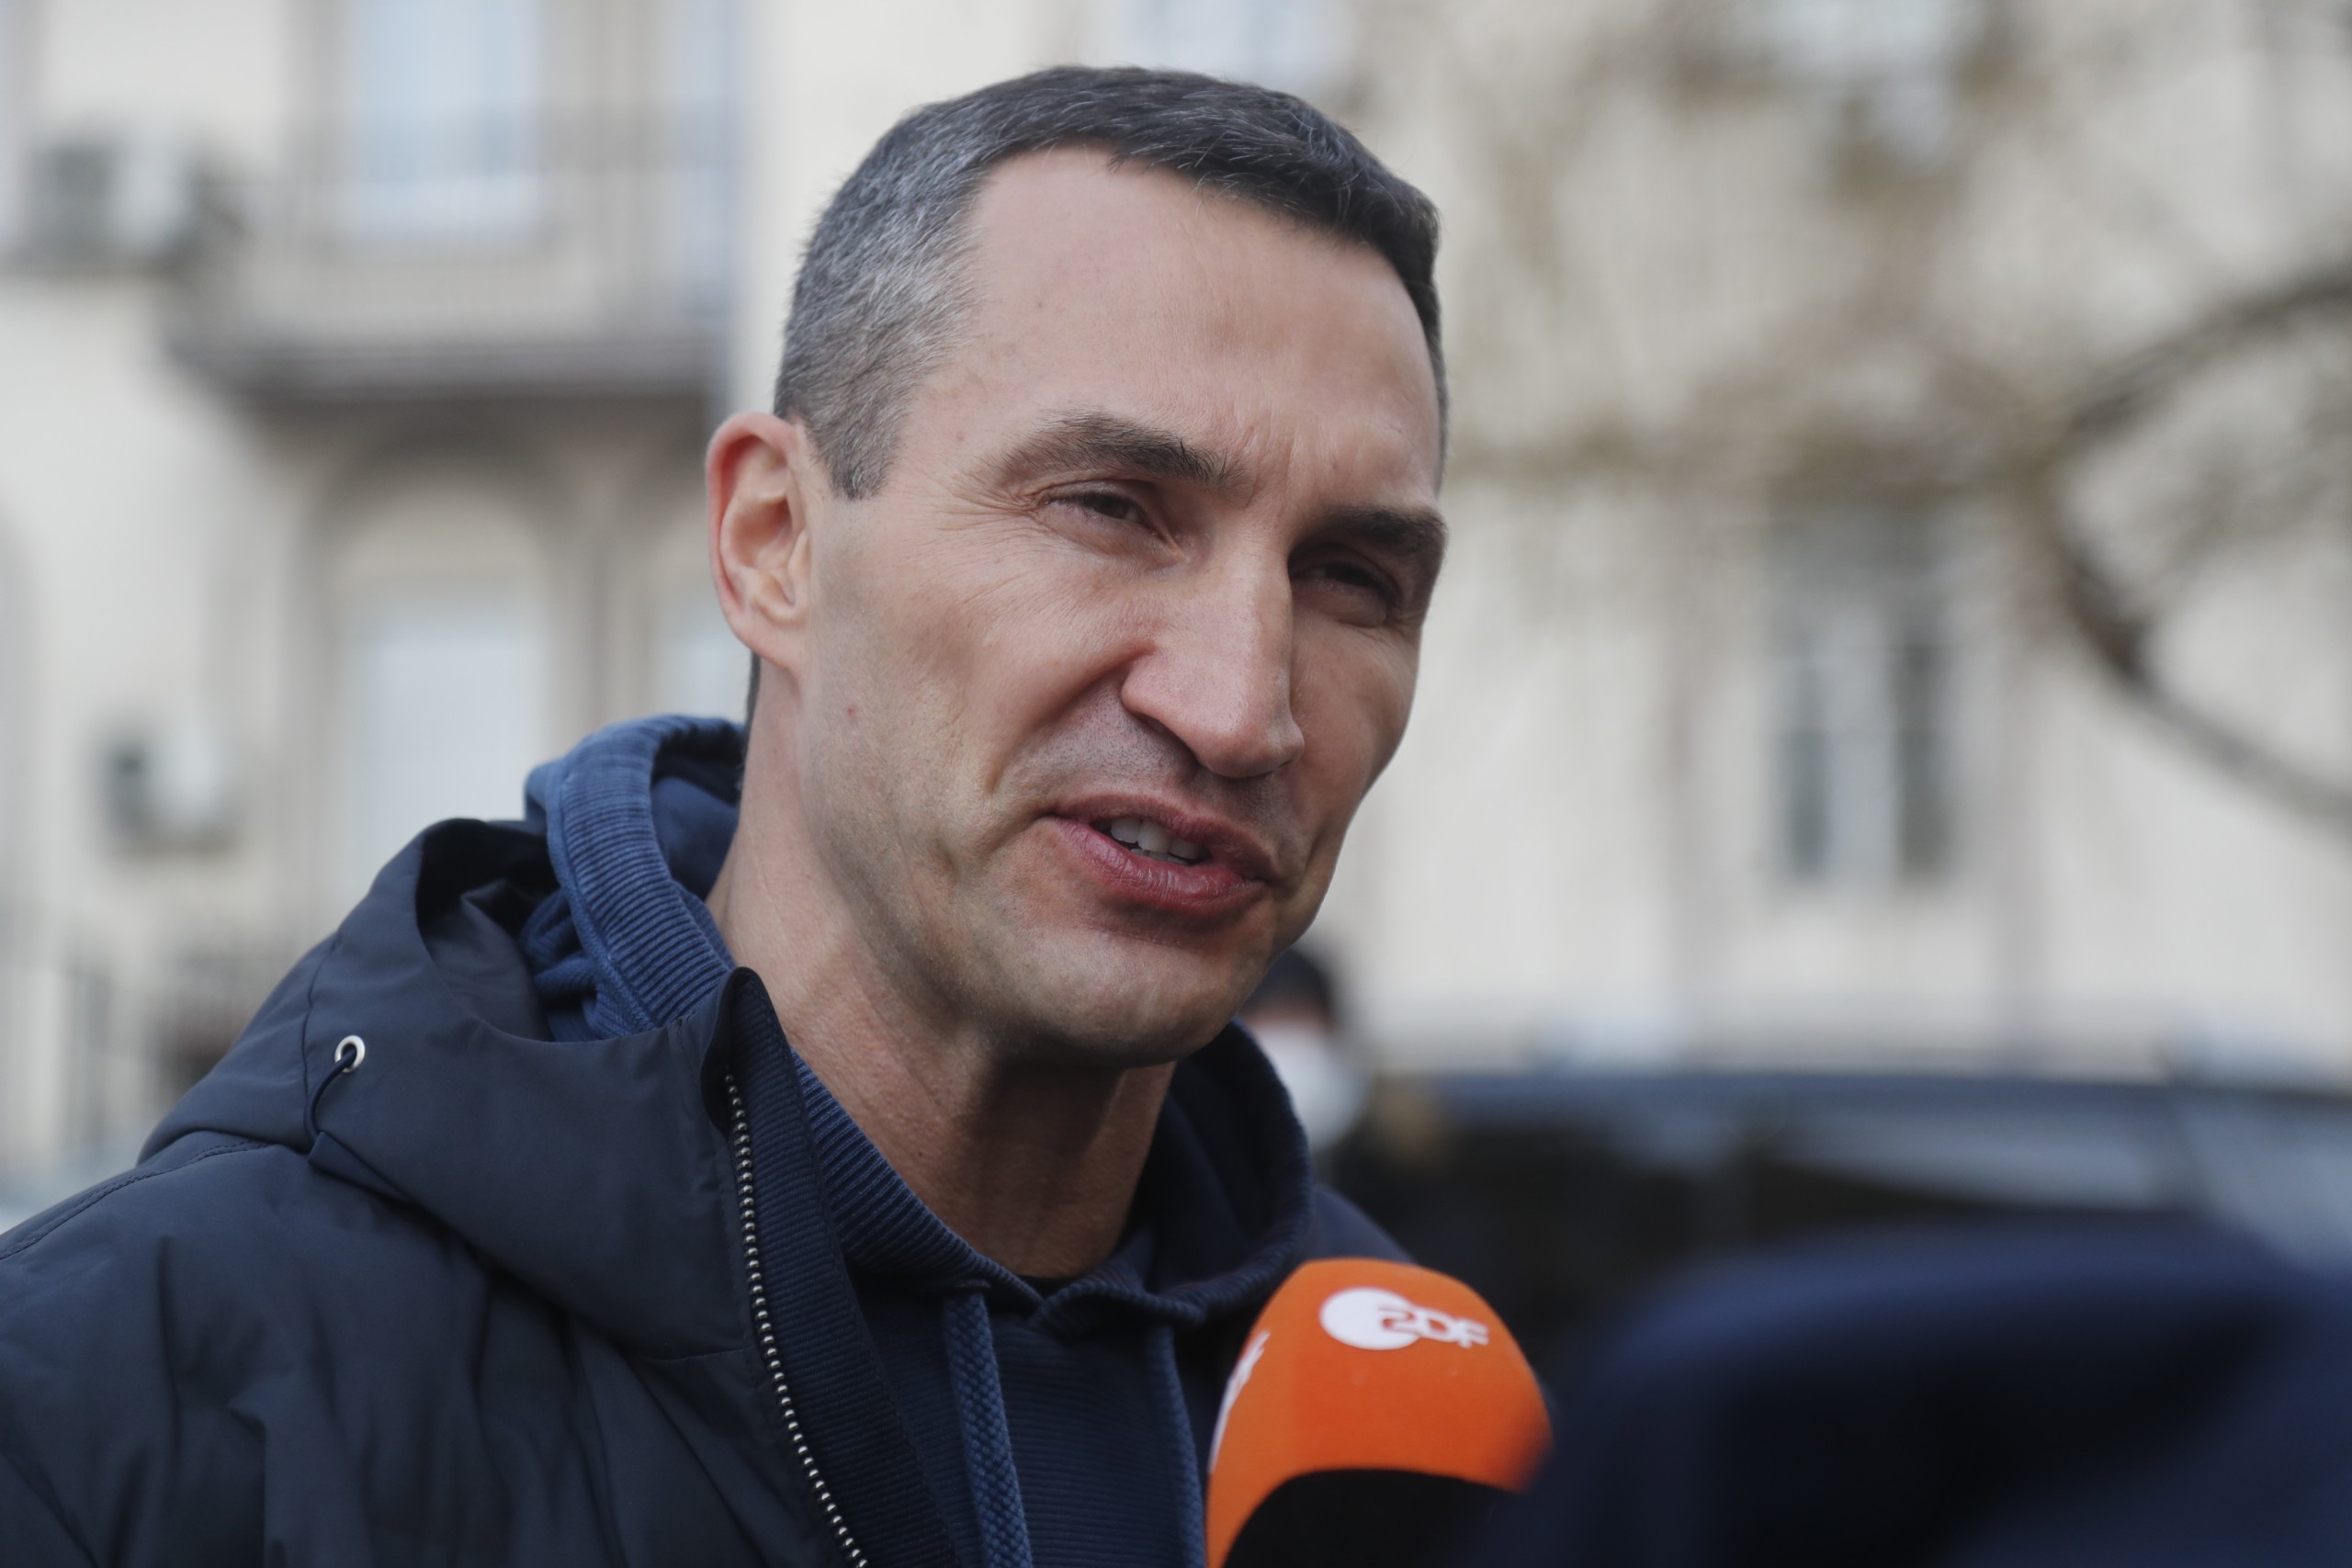 epa09722878 Former Ukrainian boxer Wladimir Klitschko speaks to the media in Kiev, Ukraine, 02 February 2022. Klitschko submitted the application and documents to join the brigade of the territorial defense of the city of Kiev amid escalating tensions with Russia.  EPA/ZURAB KURTSIKIDZE